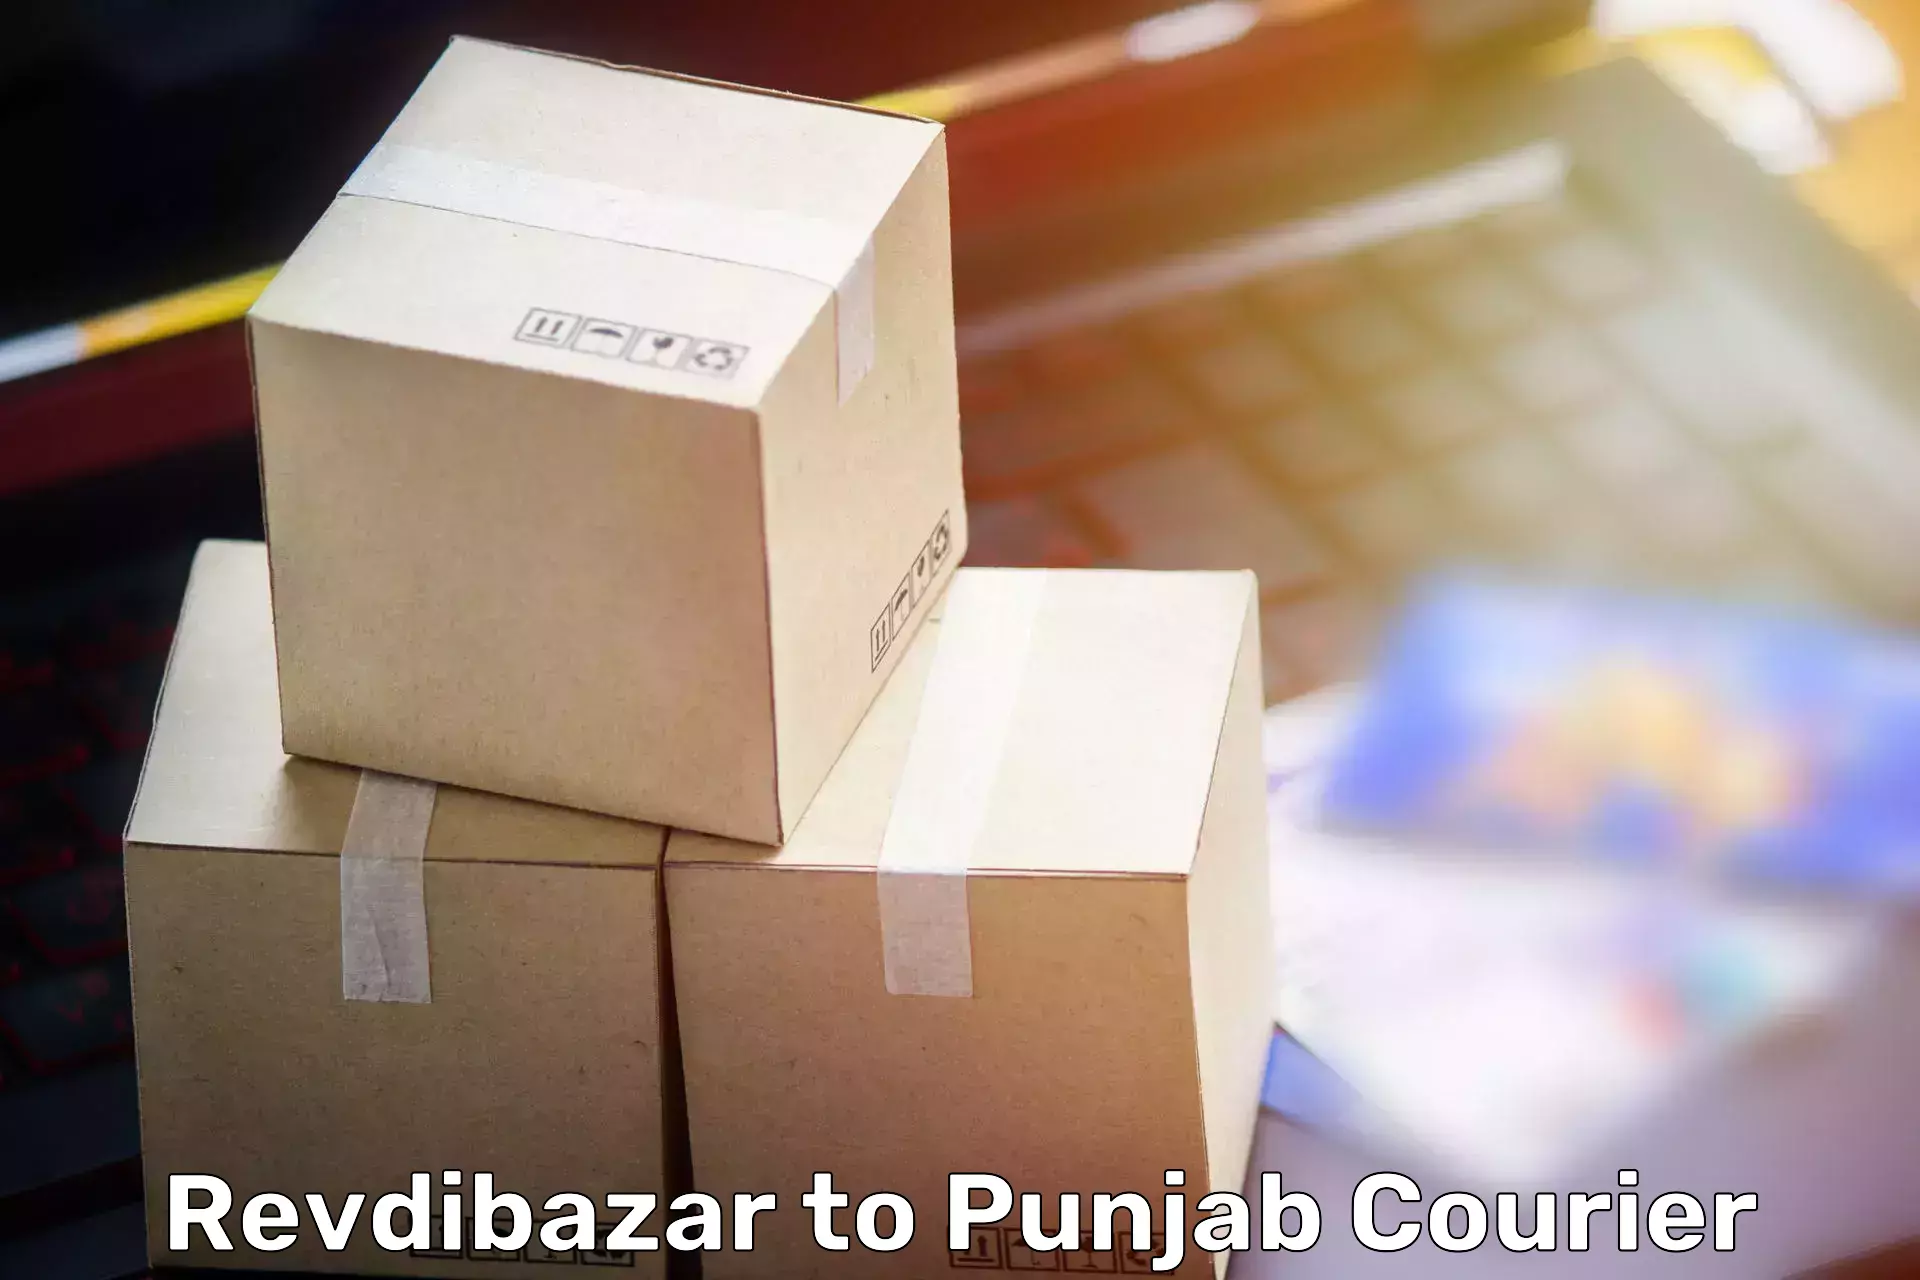 Hassle-free relocation Revdibazar to Thapar Institute of Engineering and Technology Patiala